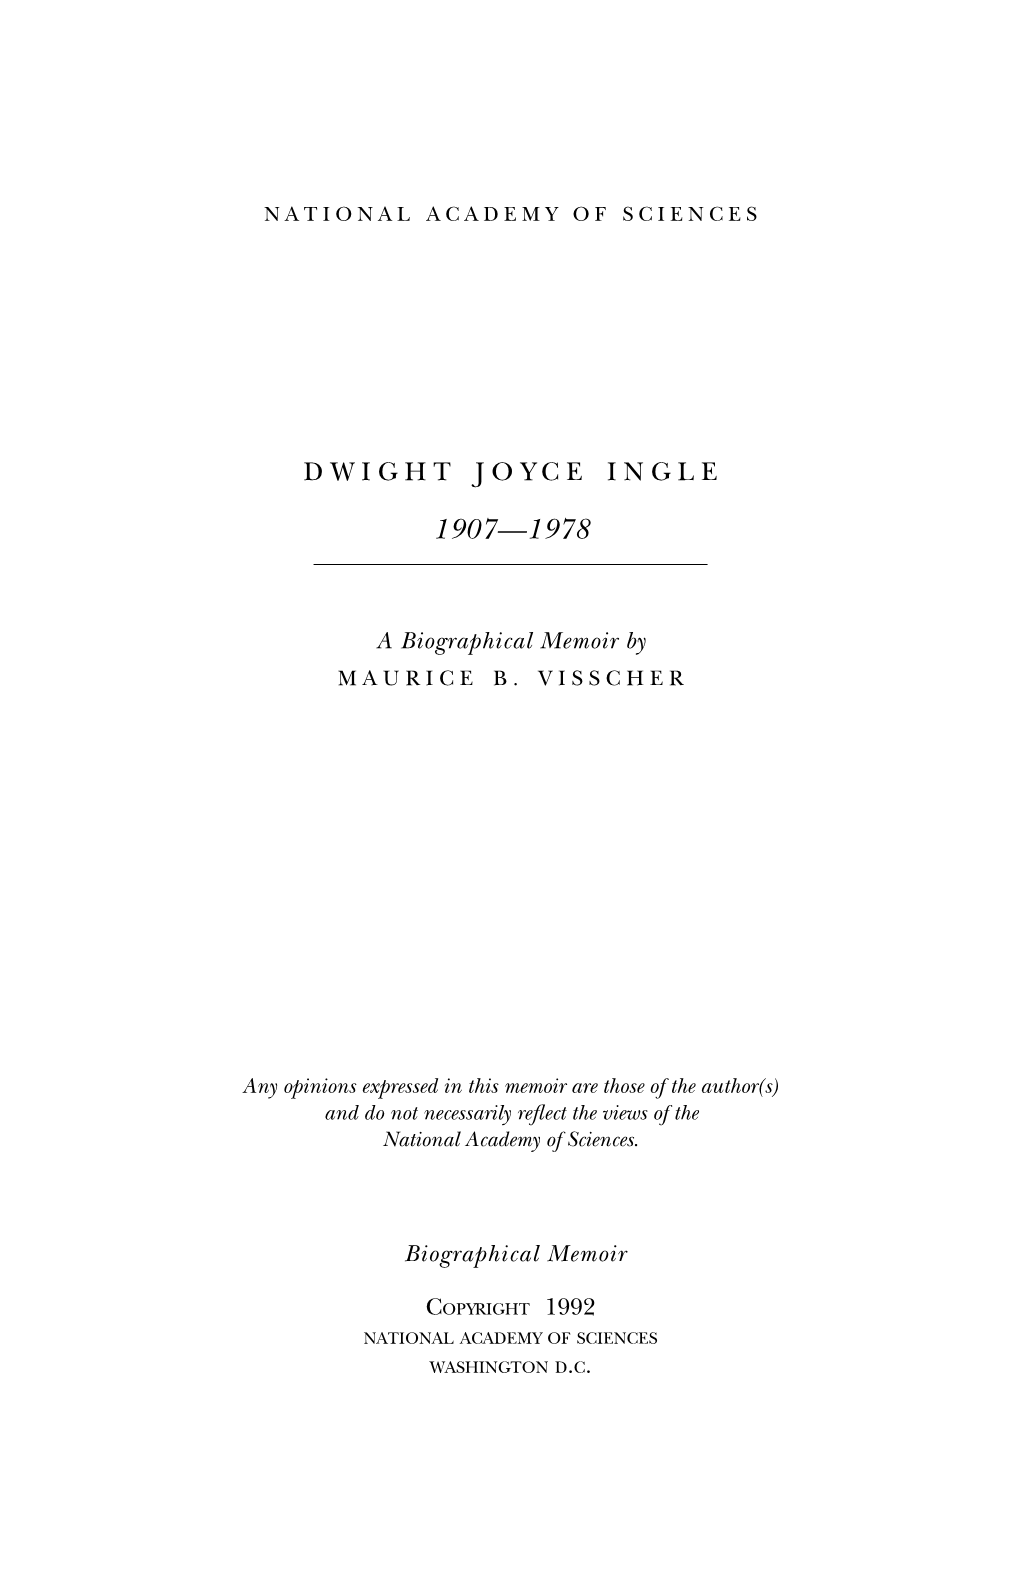 Dwight Ingle's Active Life Was the Time of Rapid Development in Endocrine Science, to Which Ingle Himself Contributed Greatly